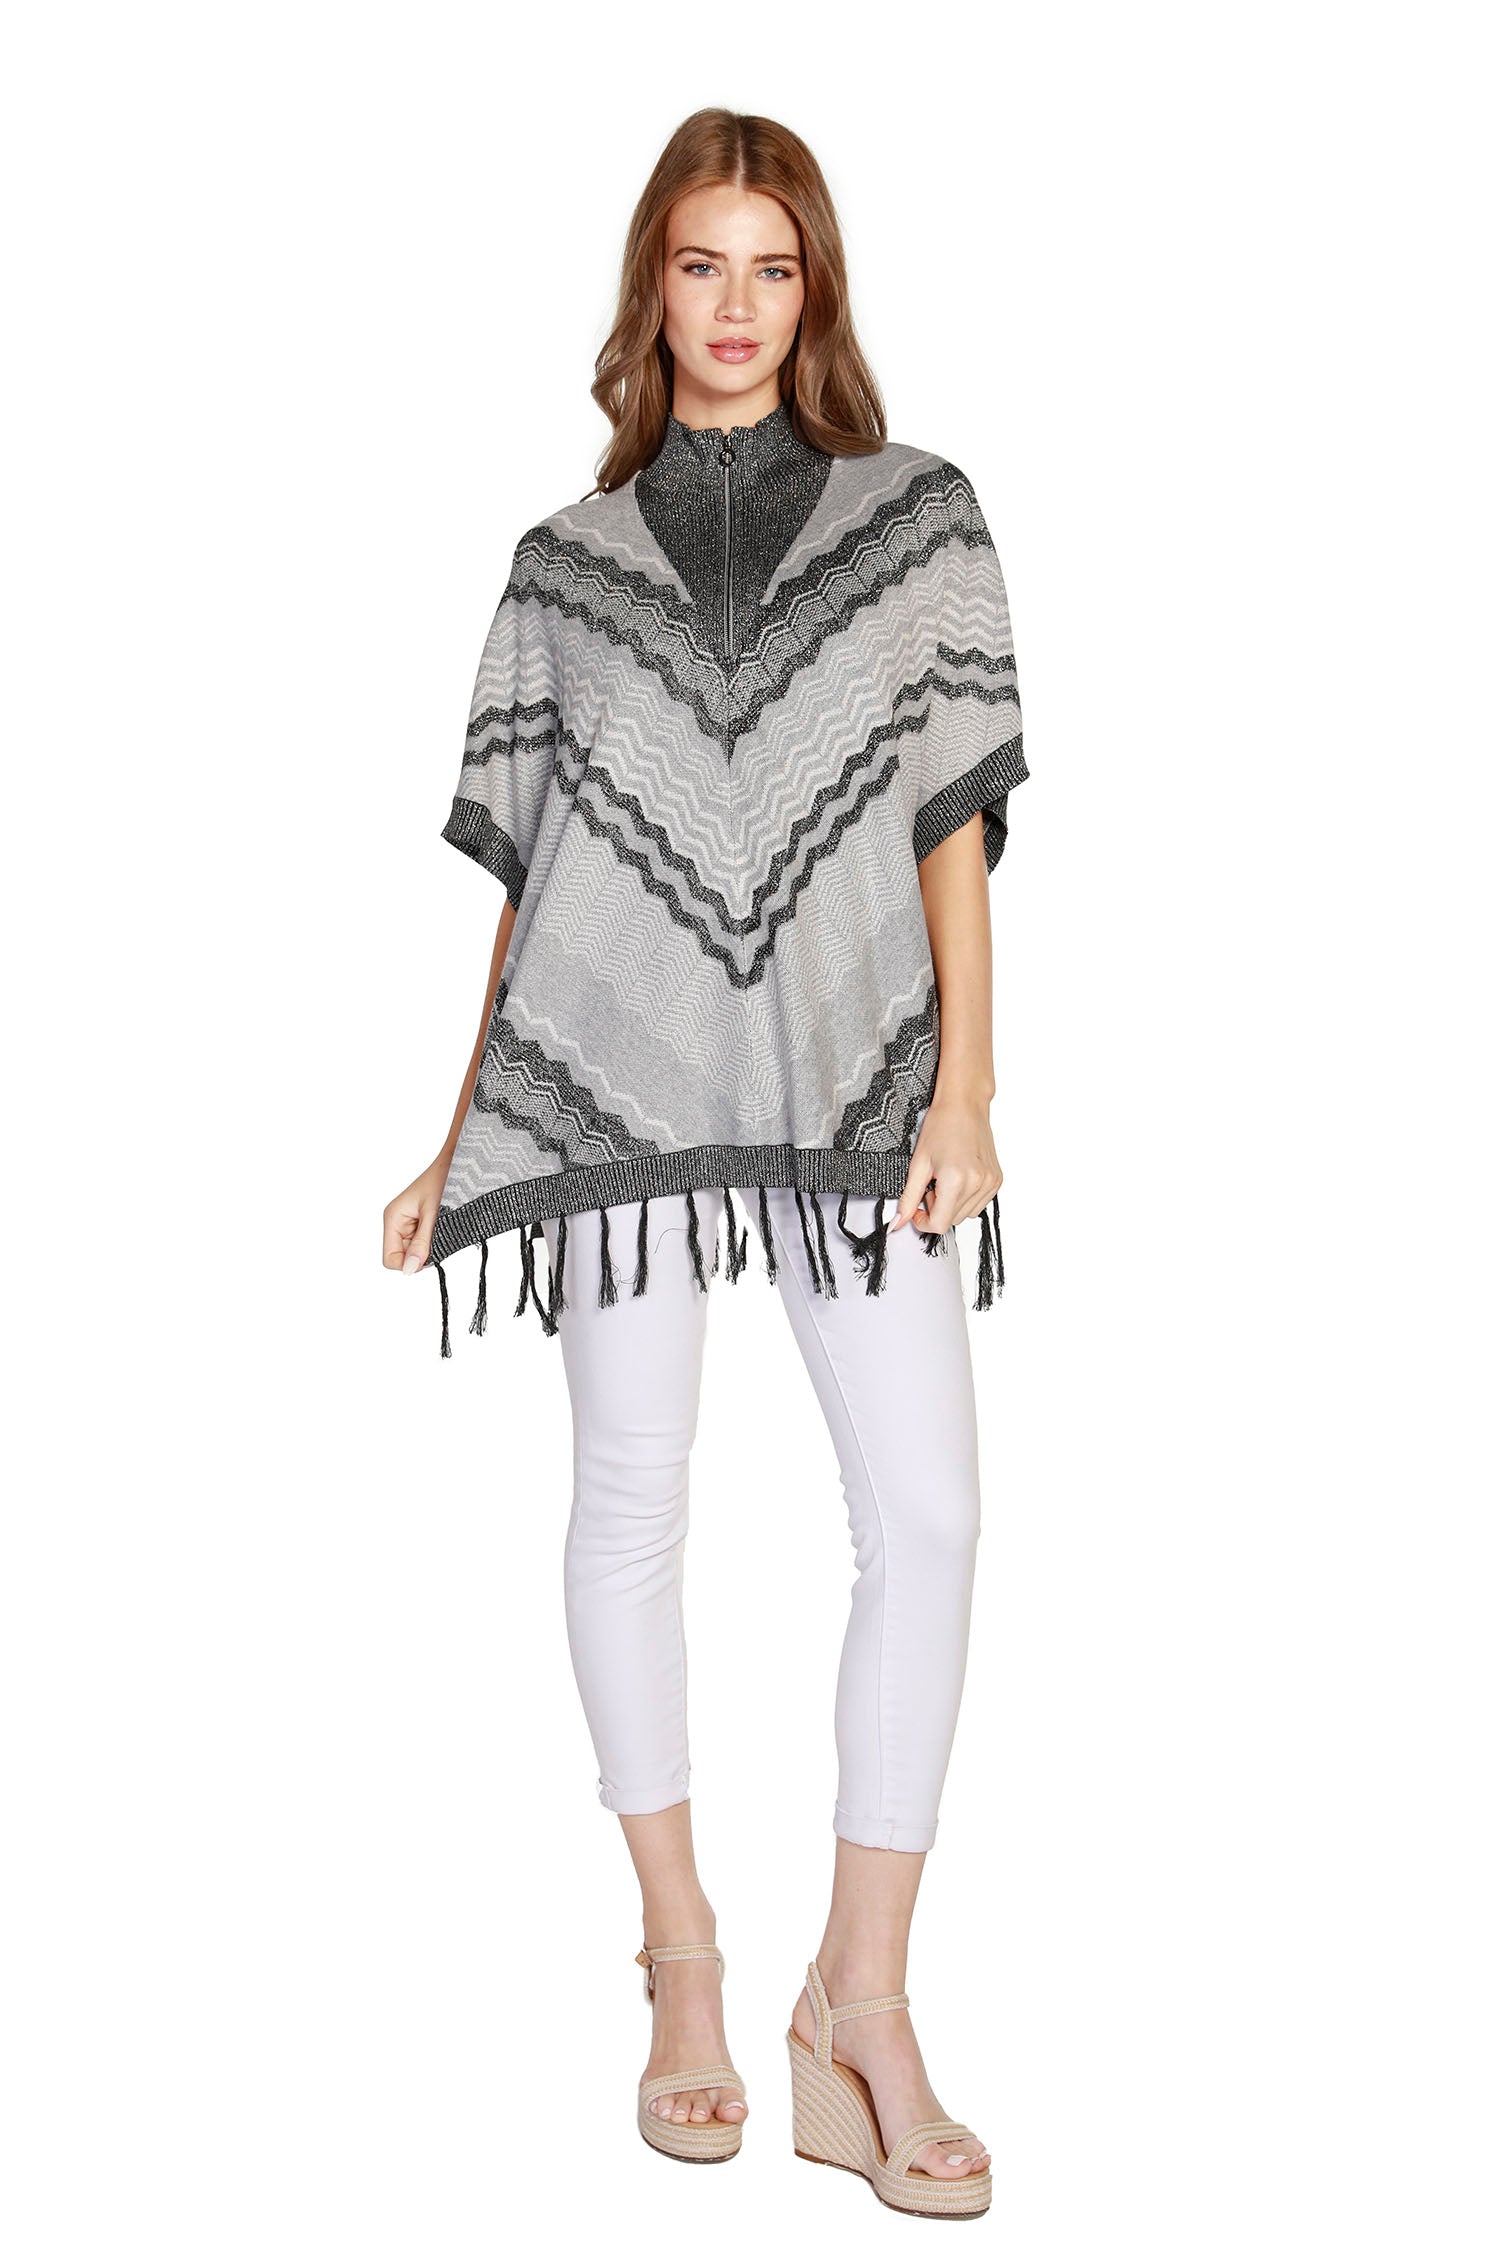 Women's Fashion Tunic Poncho with Lurex and Fringe | LAST CALL